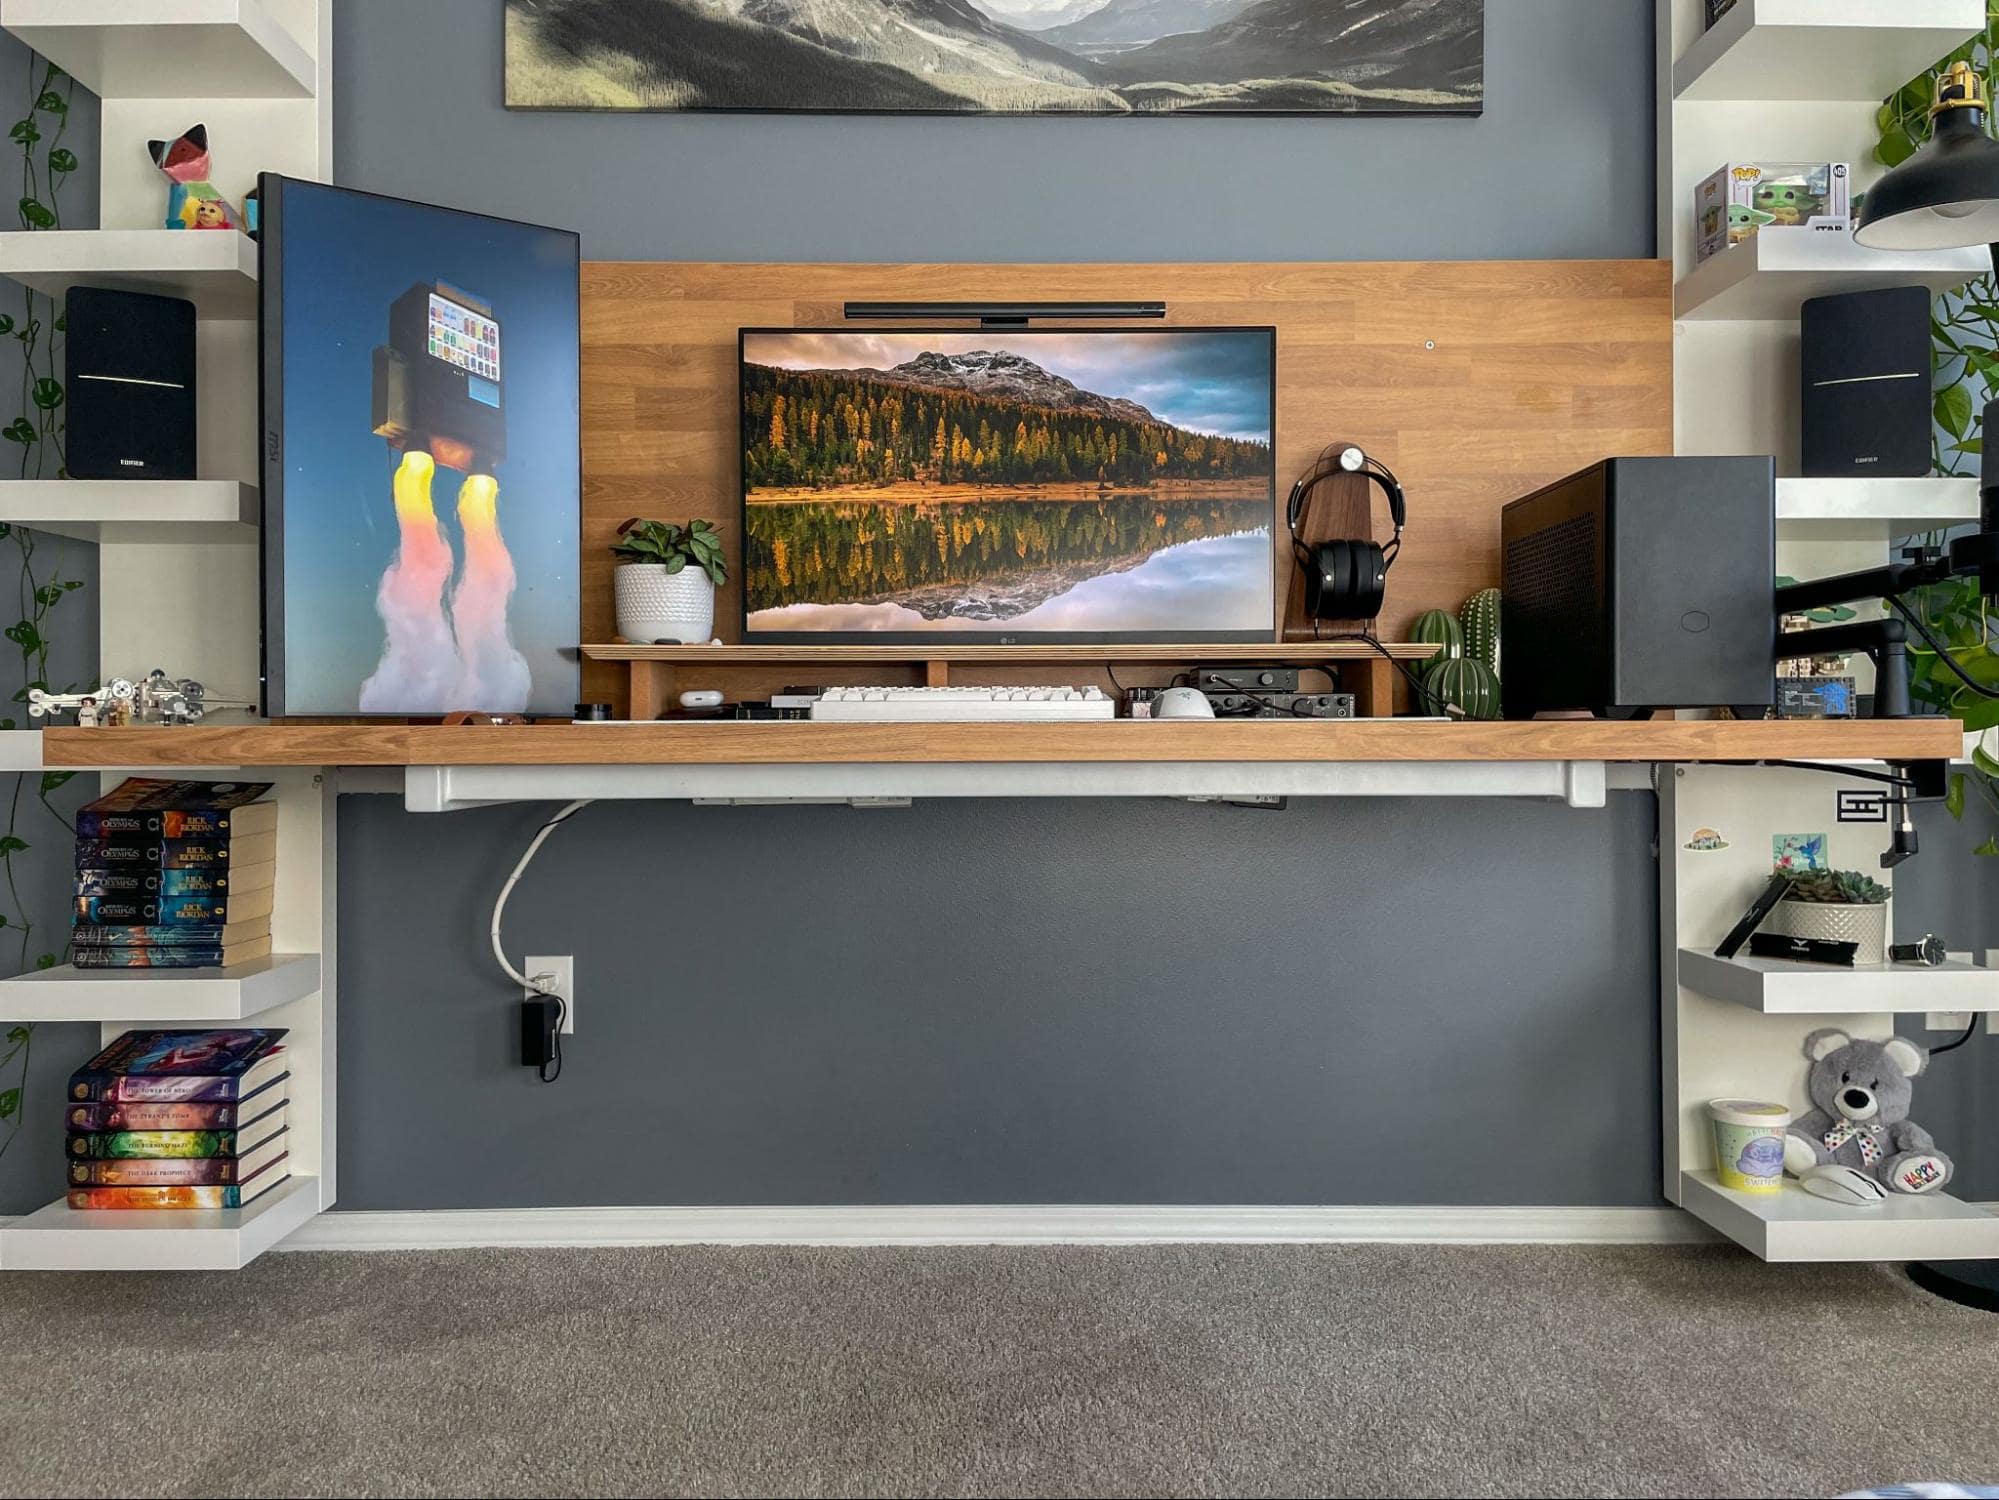 A tidy workstation with a wooden desk and shelves, featuring dual monitors, speakers, and decorative items, set against a grey wall with mountainous artwork